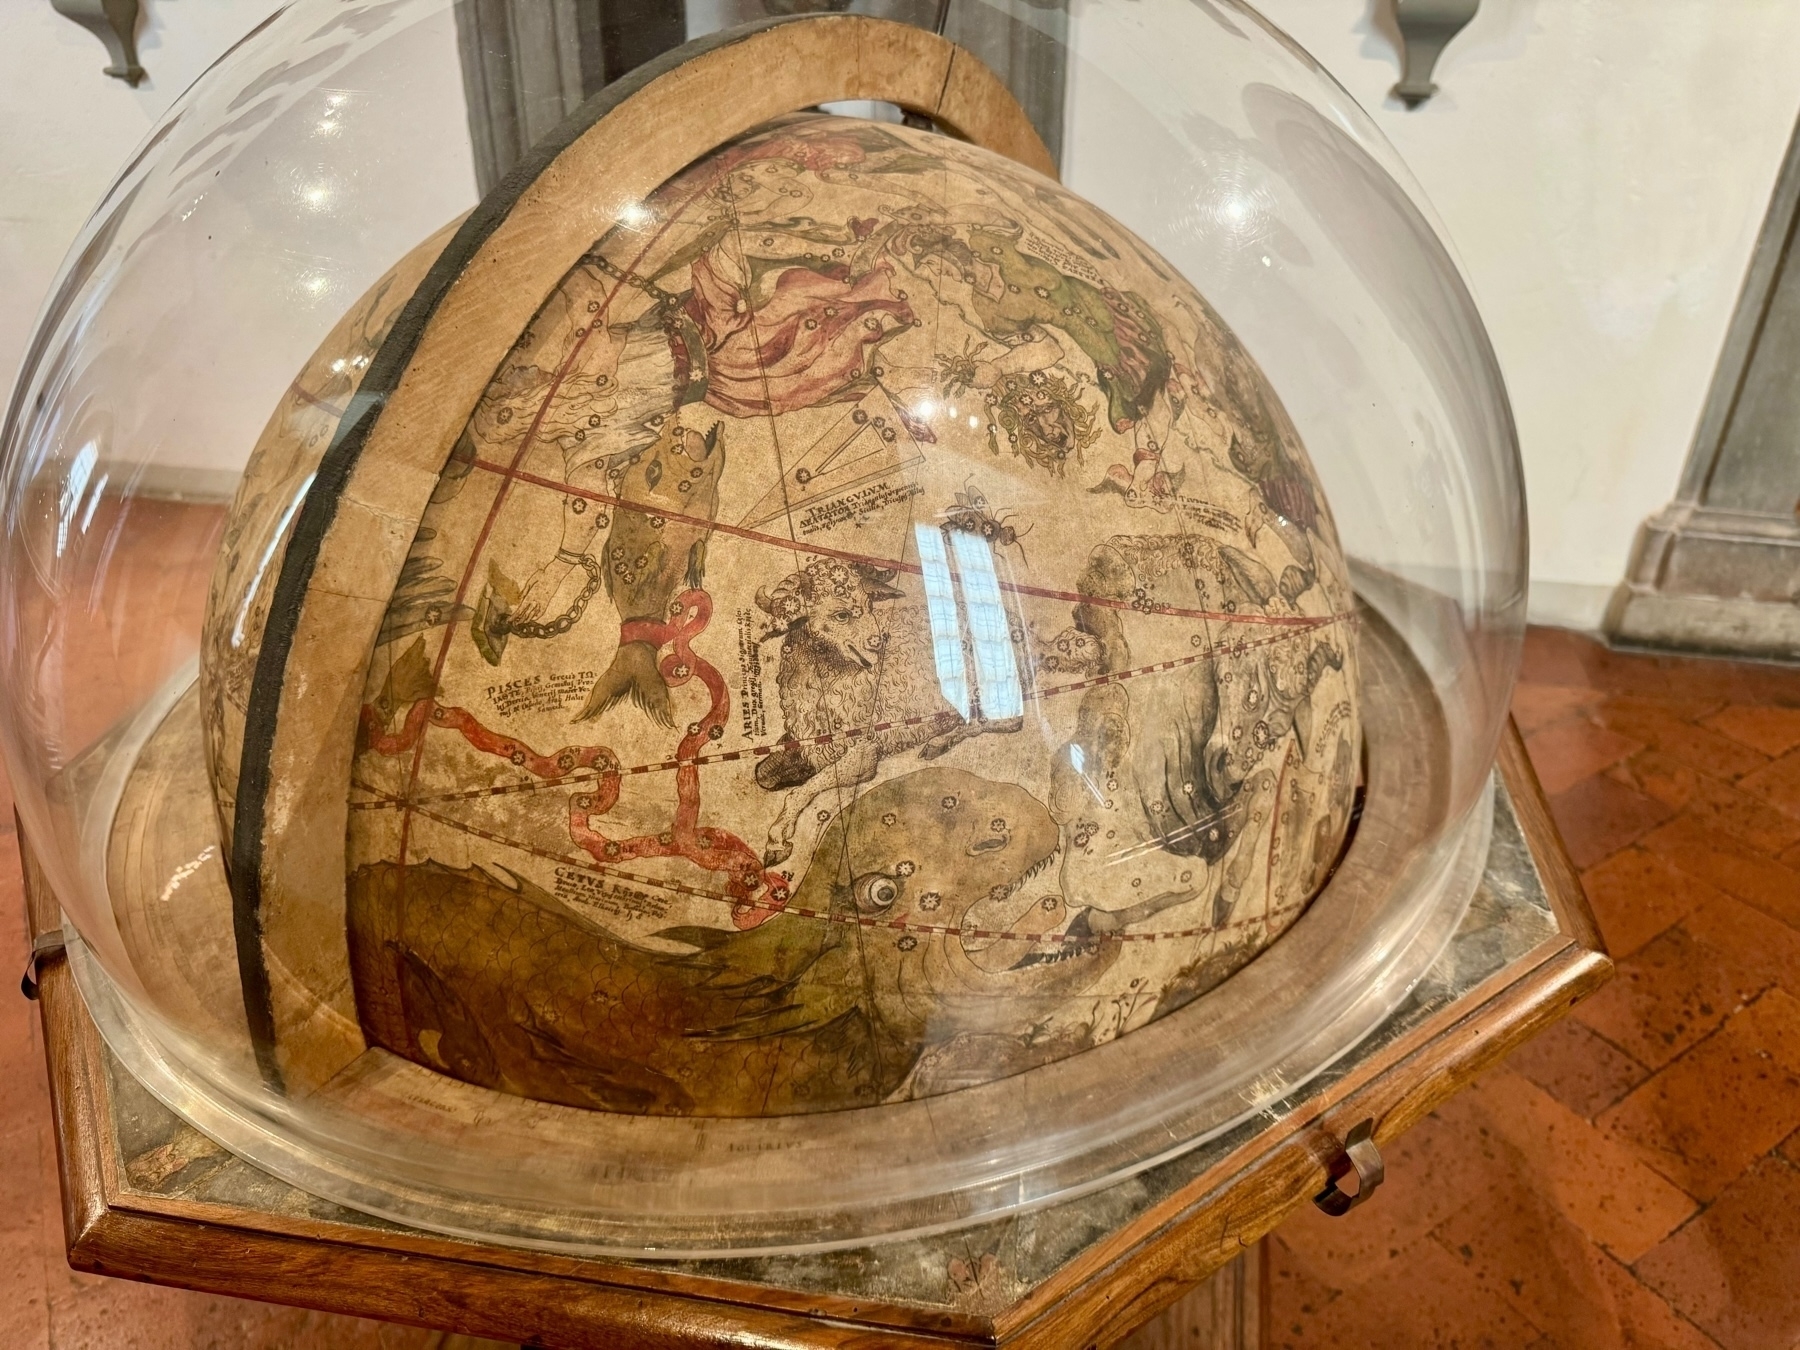 A historical celestial globe encased in a glass dome. The globe features detailed illustrations of constellations with mythological figures and celestial coordinates. The setup is placed on a wooden stand, and its surroundings indicate an indoor museum or exhibit space.